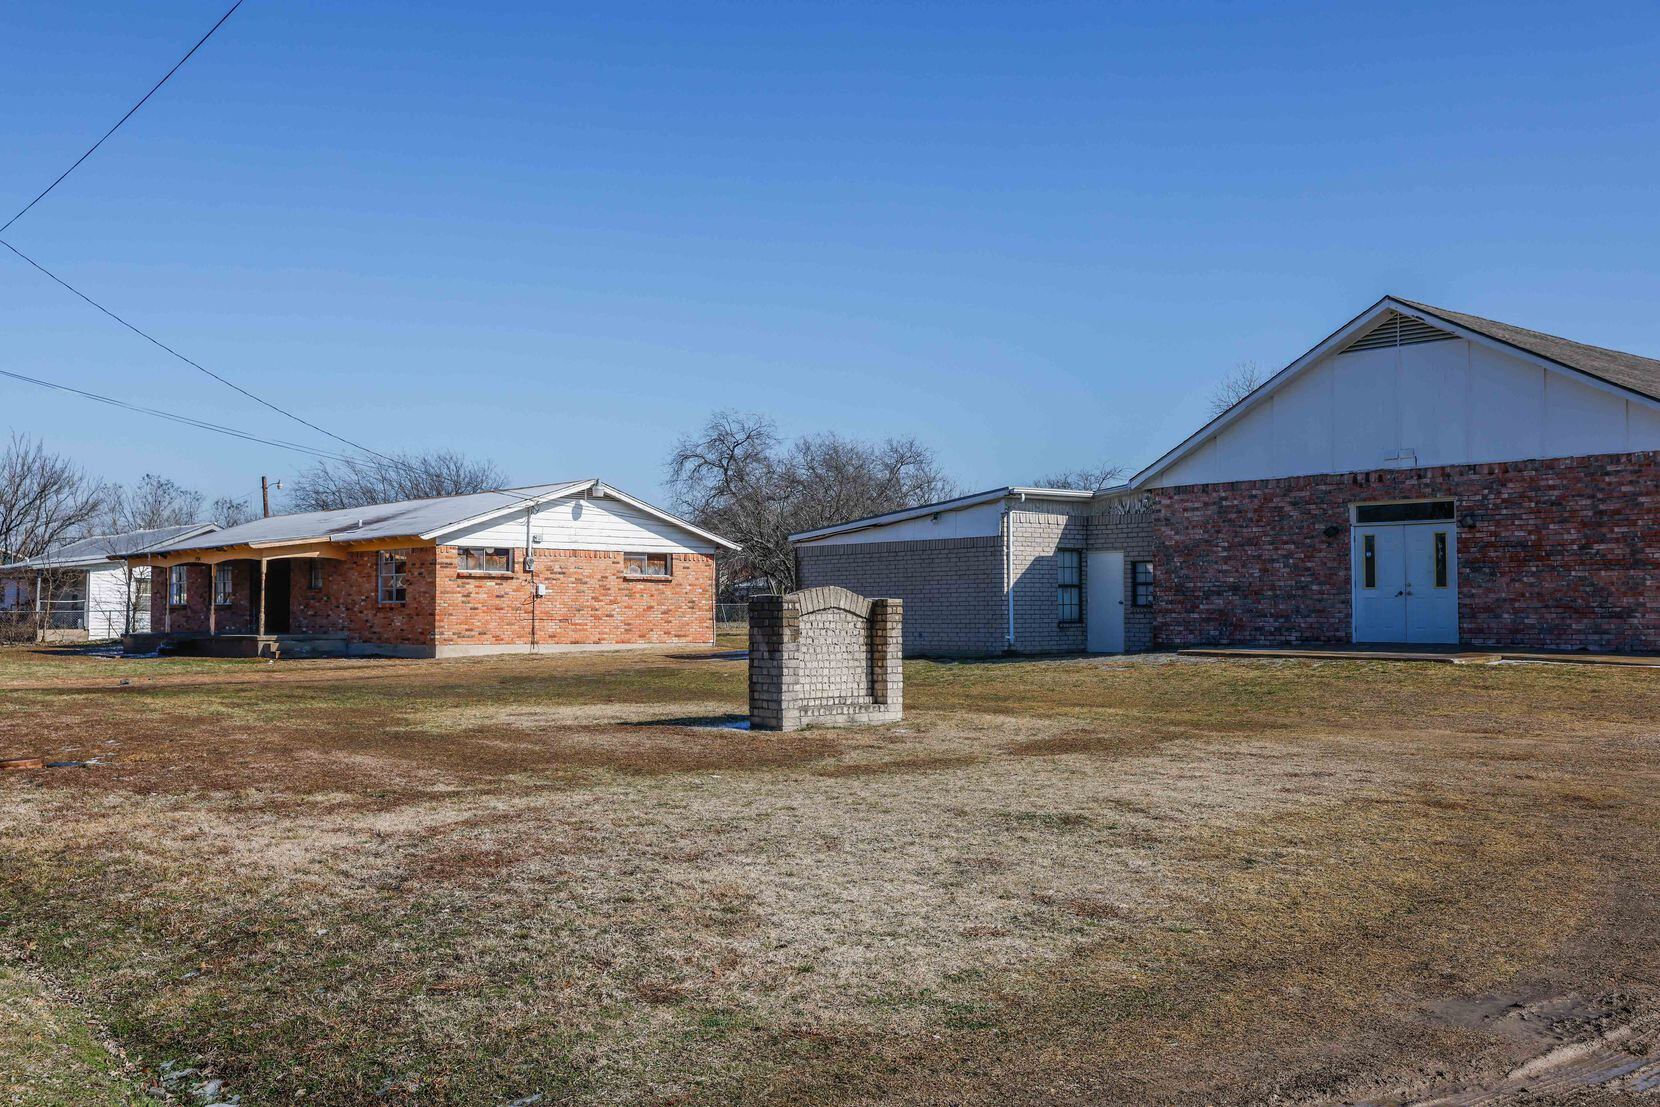 The Family Center that owns the Lancaster community home on Friday, Feb. 3, 2023. Dallas...